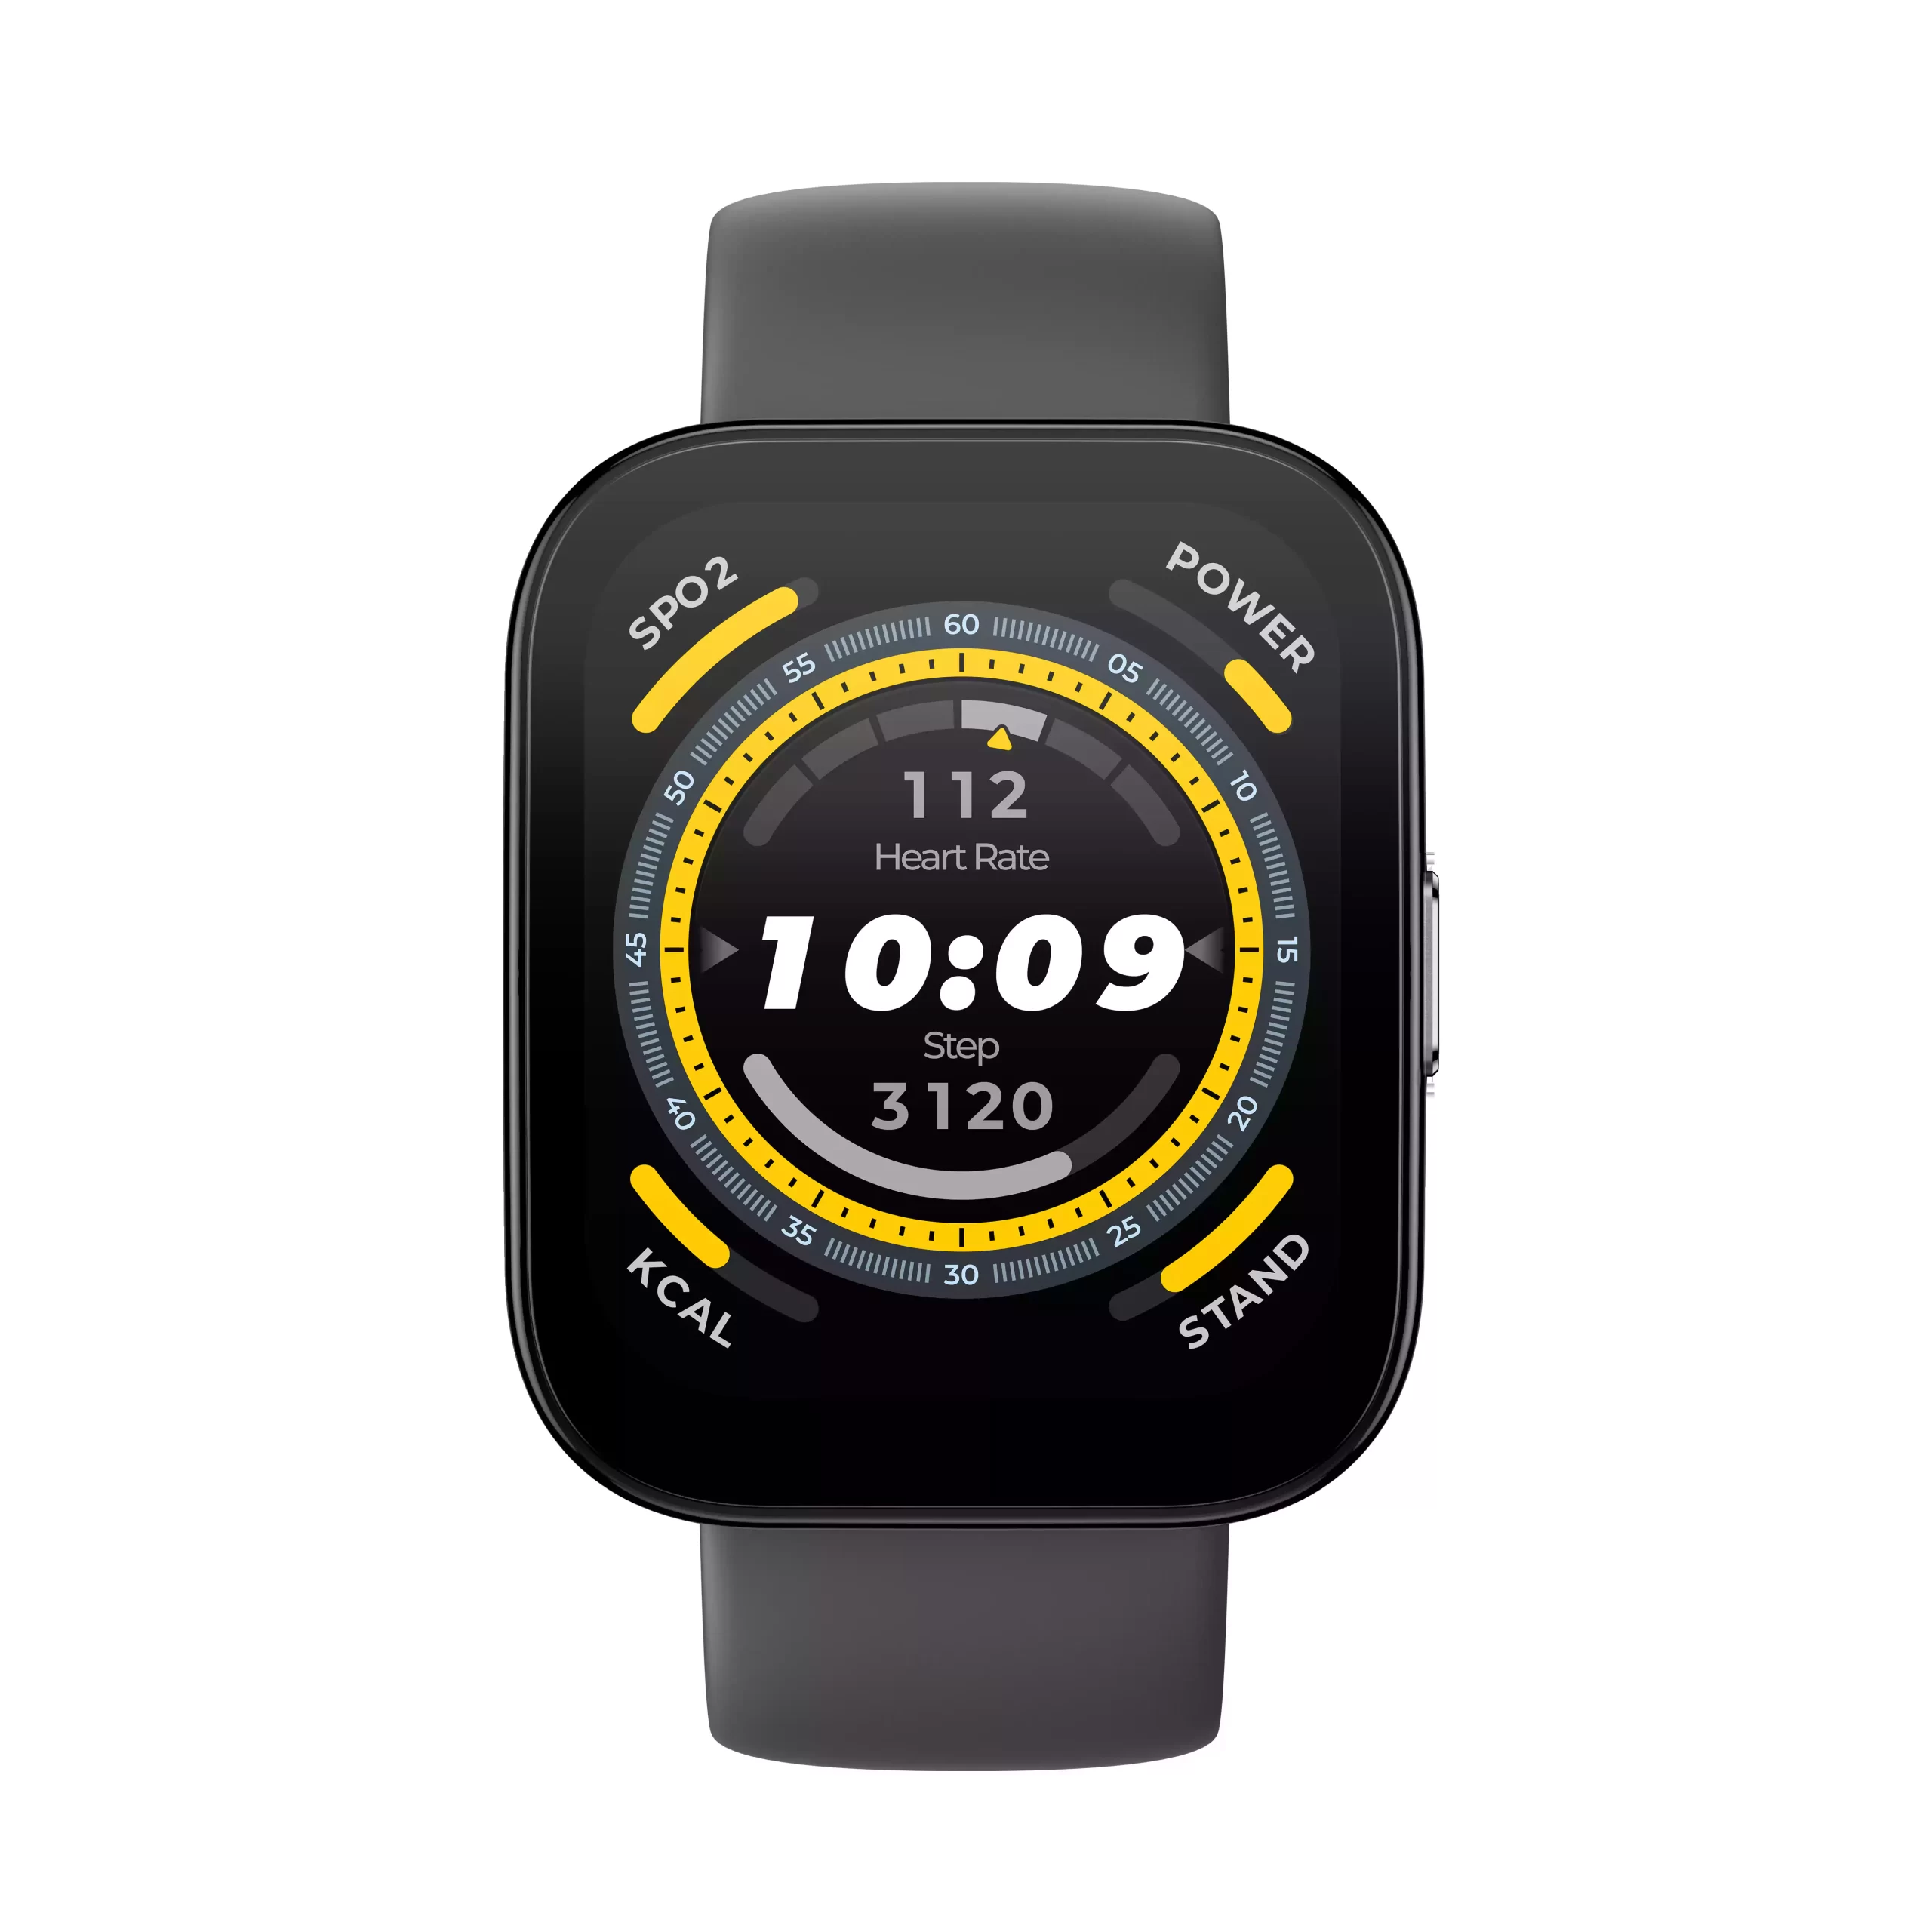 Amazfit Bip 5 Price and Availability